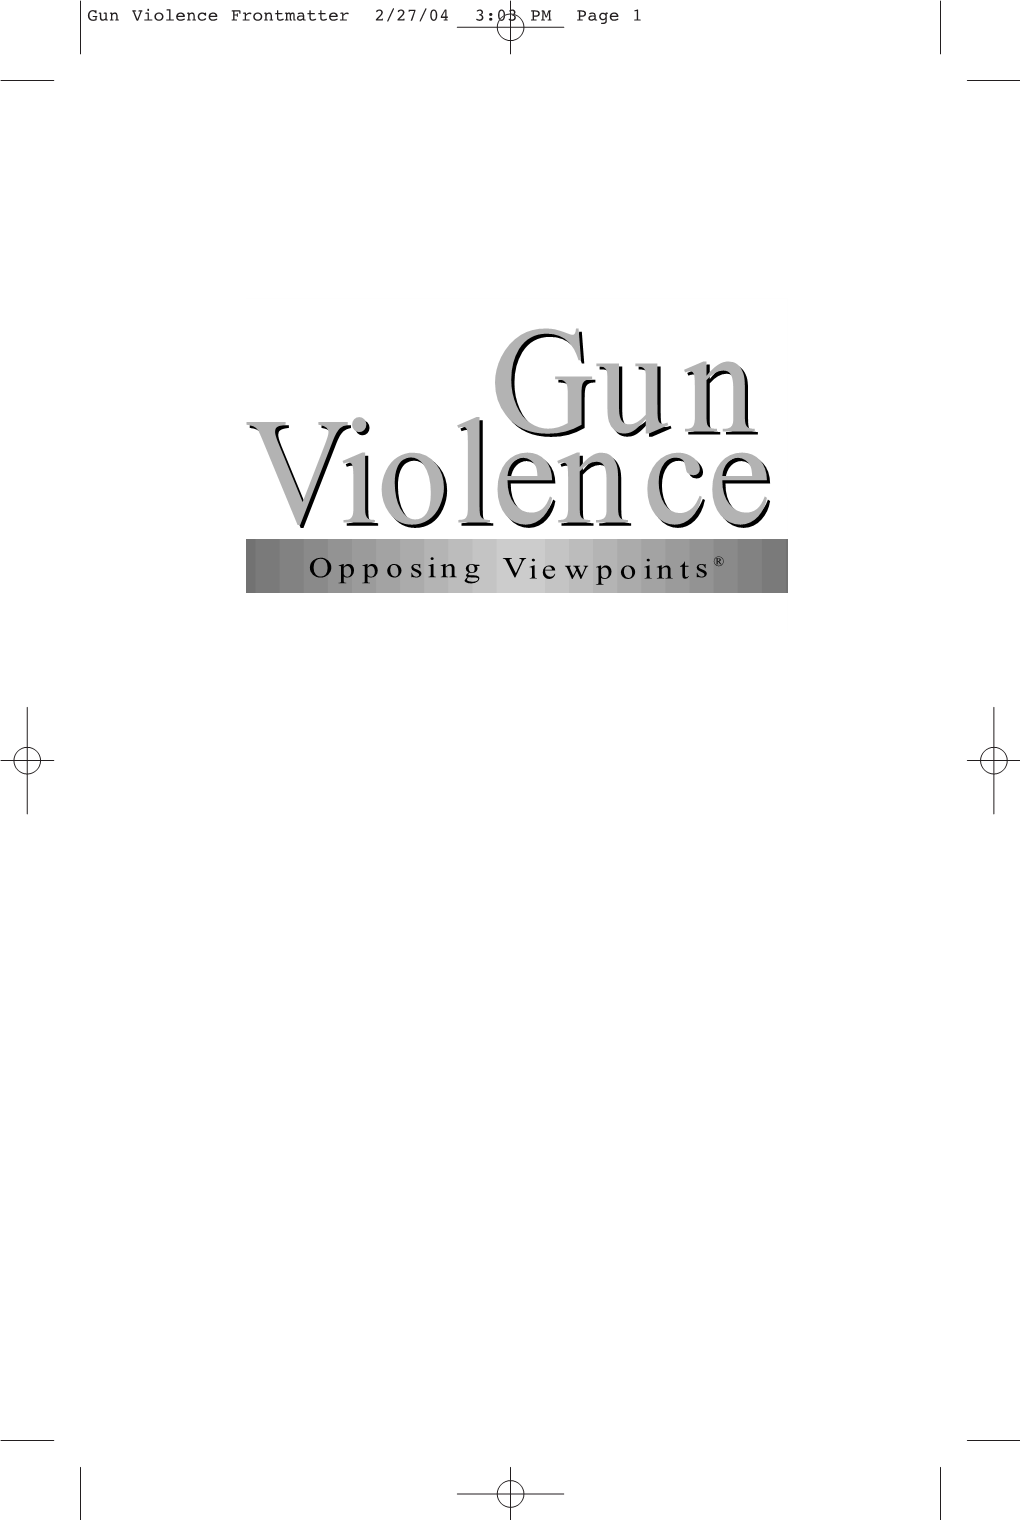 Opposing Viewpoints® Gun Violence Frontmatter 2/27/04 3:03 PM Page 2